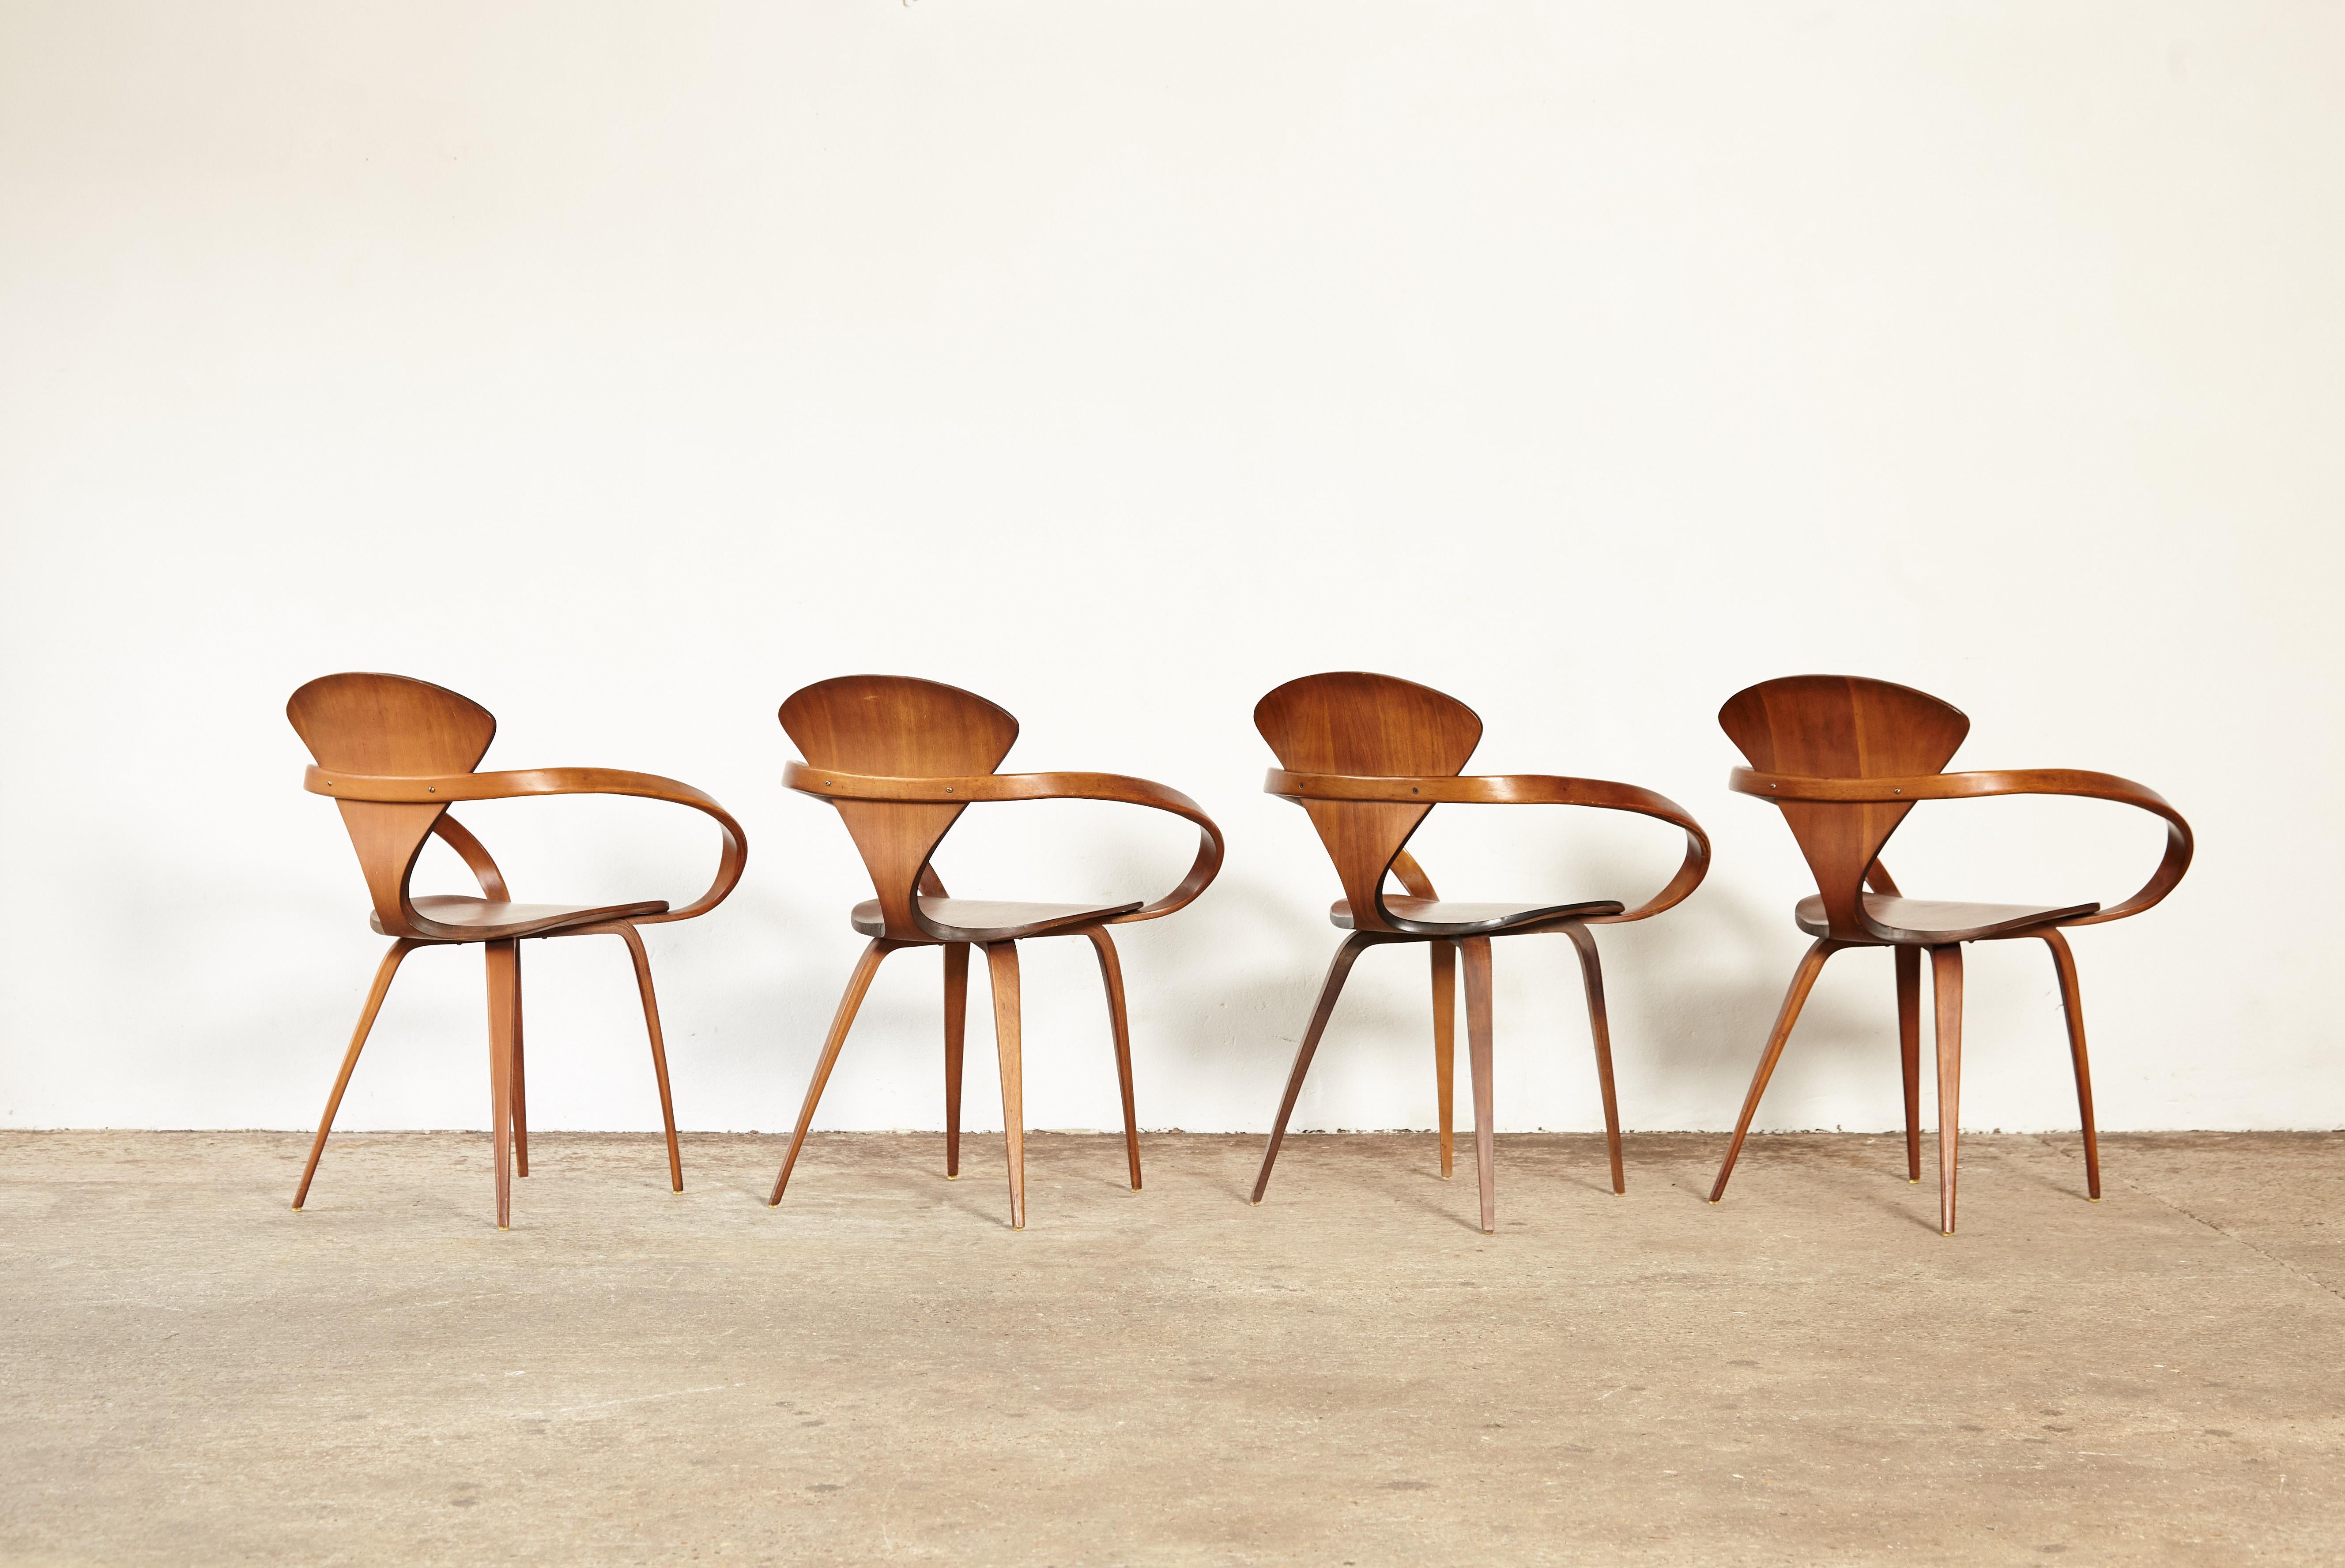 American Set of Norman Cherner Pretzel Dining Chairs, Made by Plycraft, USA, 1960s For Sale